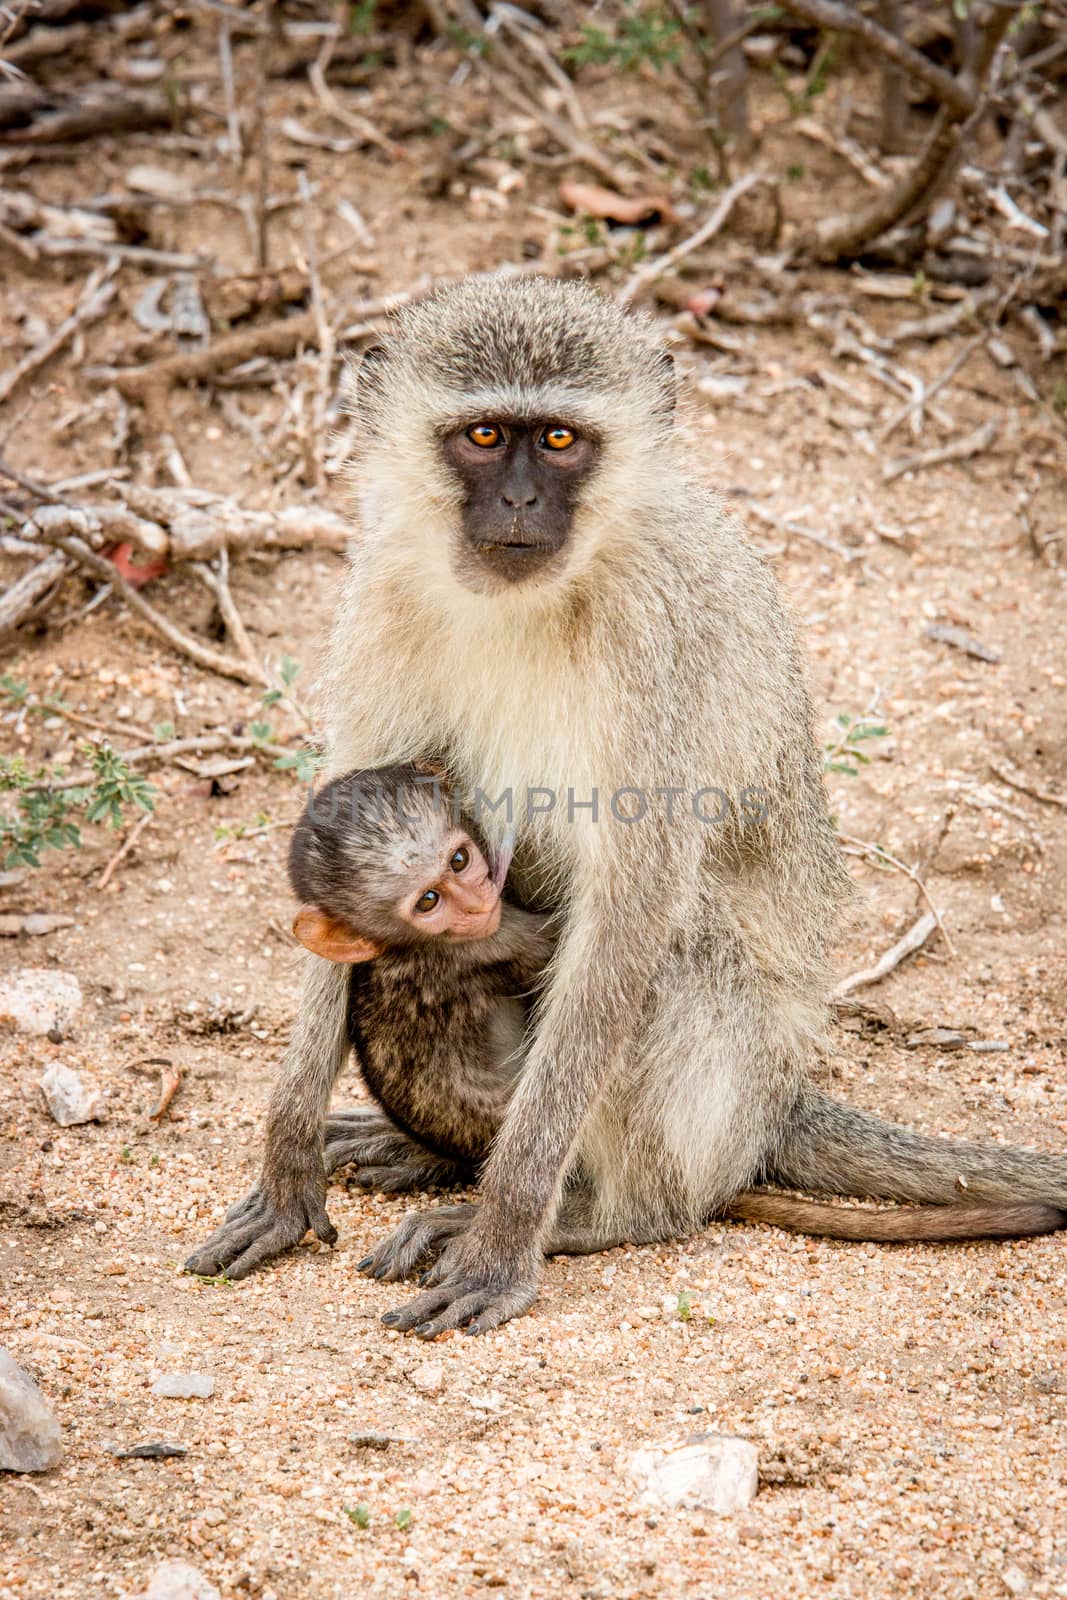 Vervet monkey mother with a baby in the Kruger National Park, South Africa.